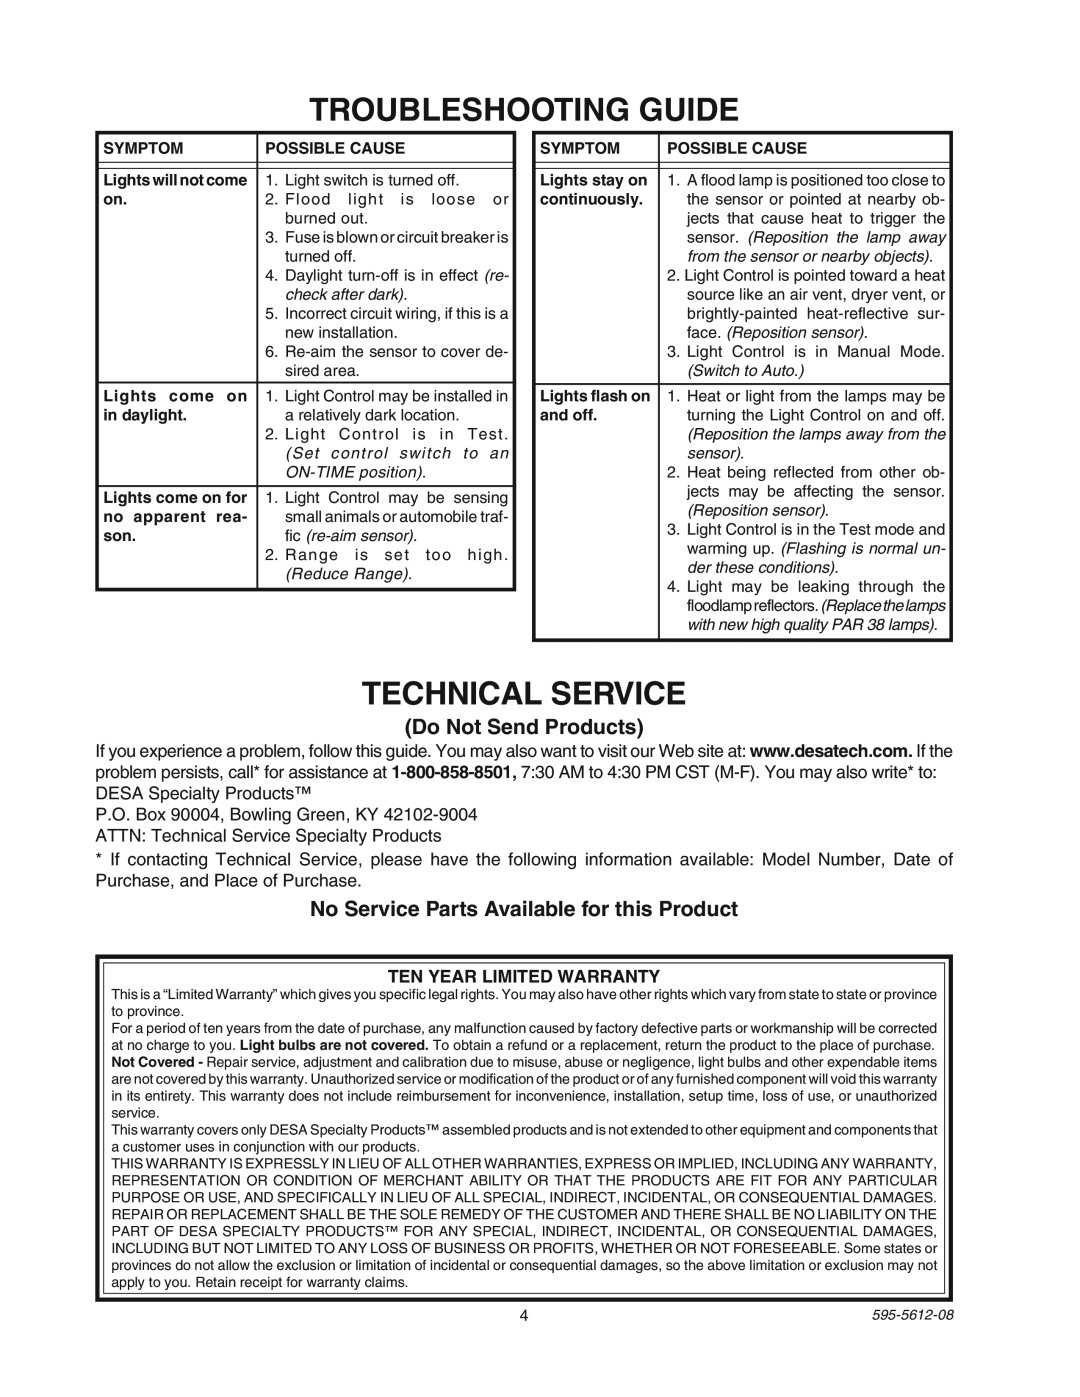 Heath Zenith SL-9525 manual Troubleshooting Guide, Technical Service, Do Not Send Products, Ten Year Limited Warranty 